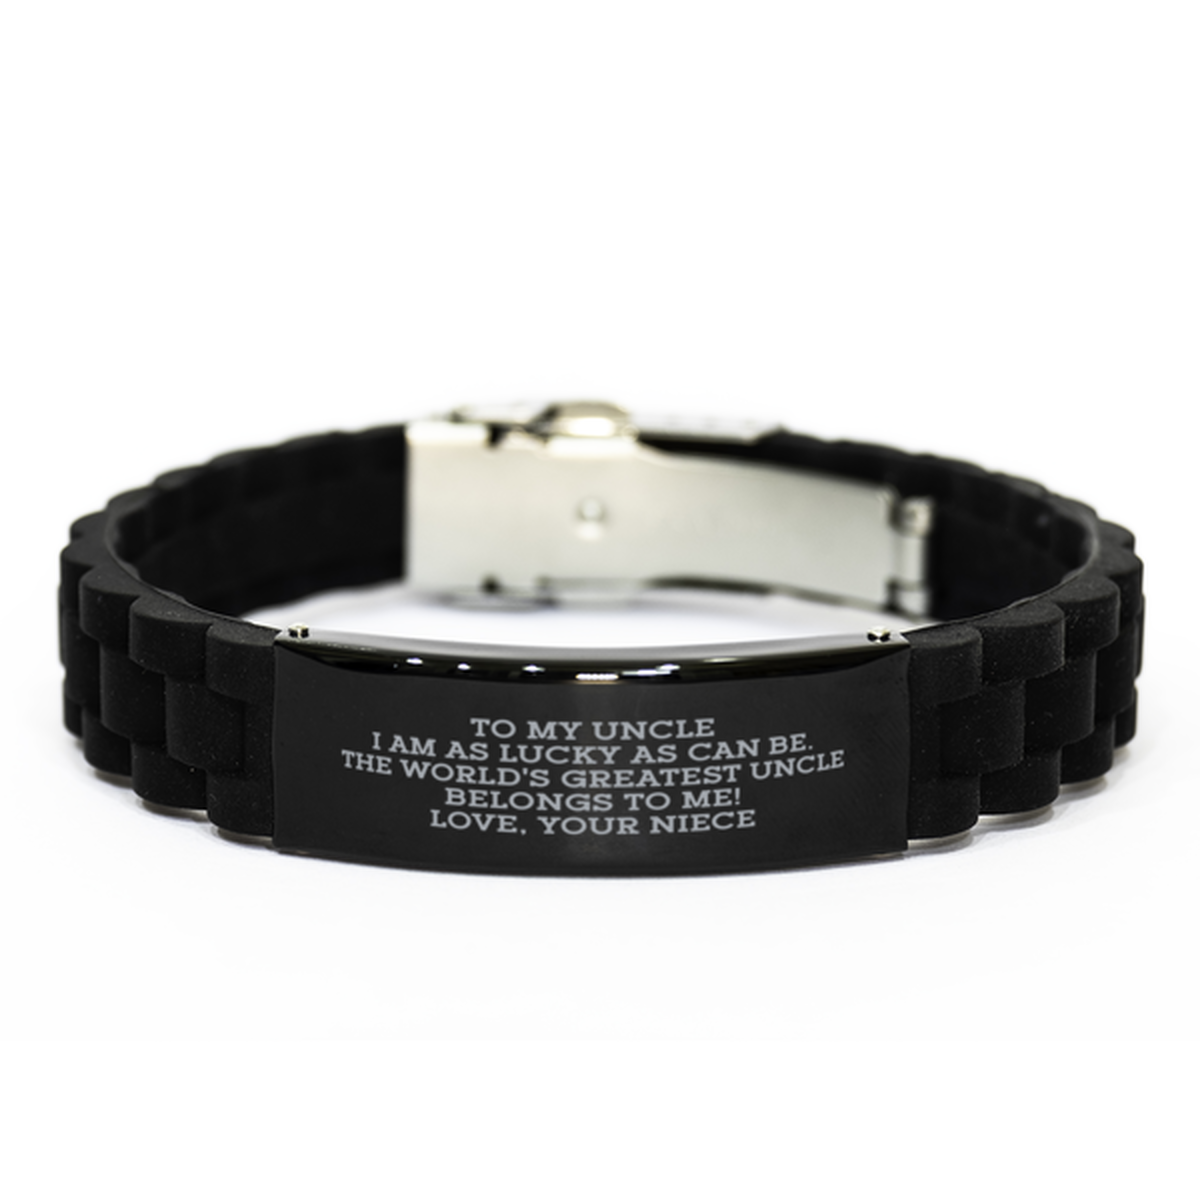 To My Uncle  Black Bracelet, World's Greatest Uncle Belongs To Me, Fathers Day Gifts For Uncle From Niece, Birthday Gifts For Men